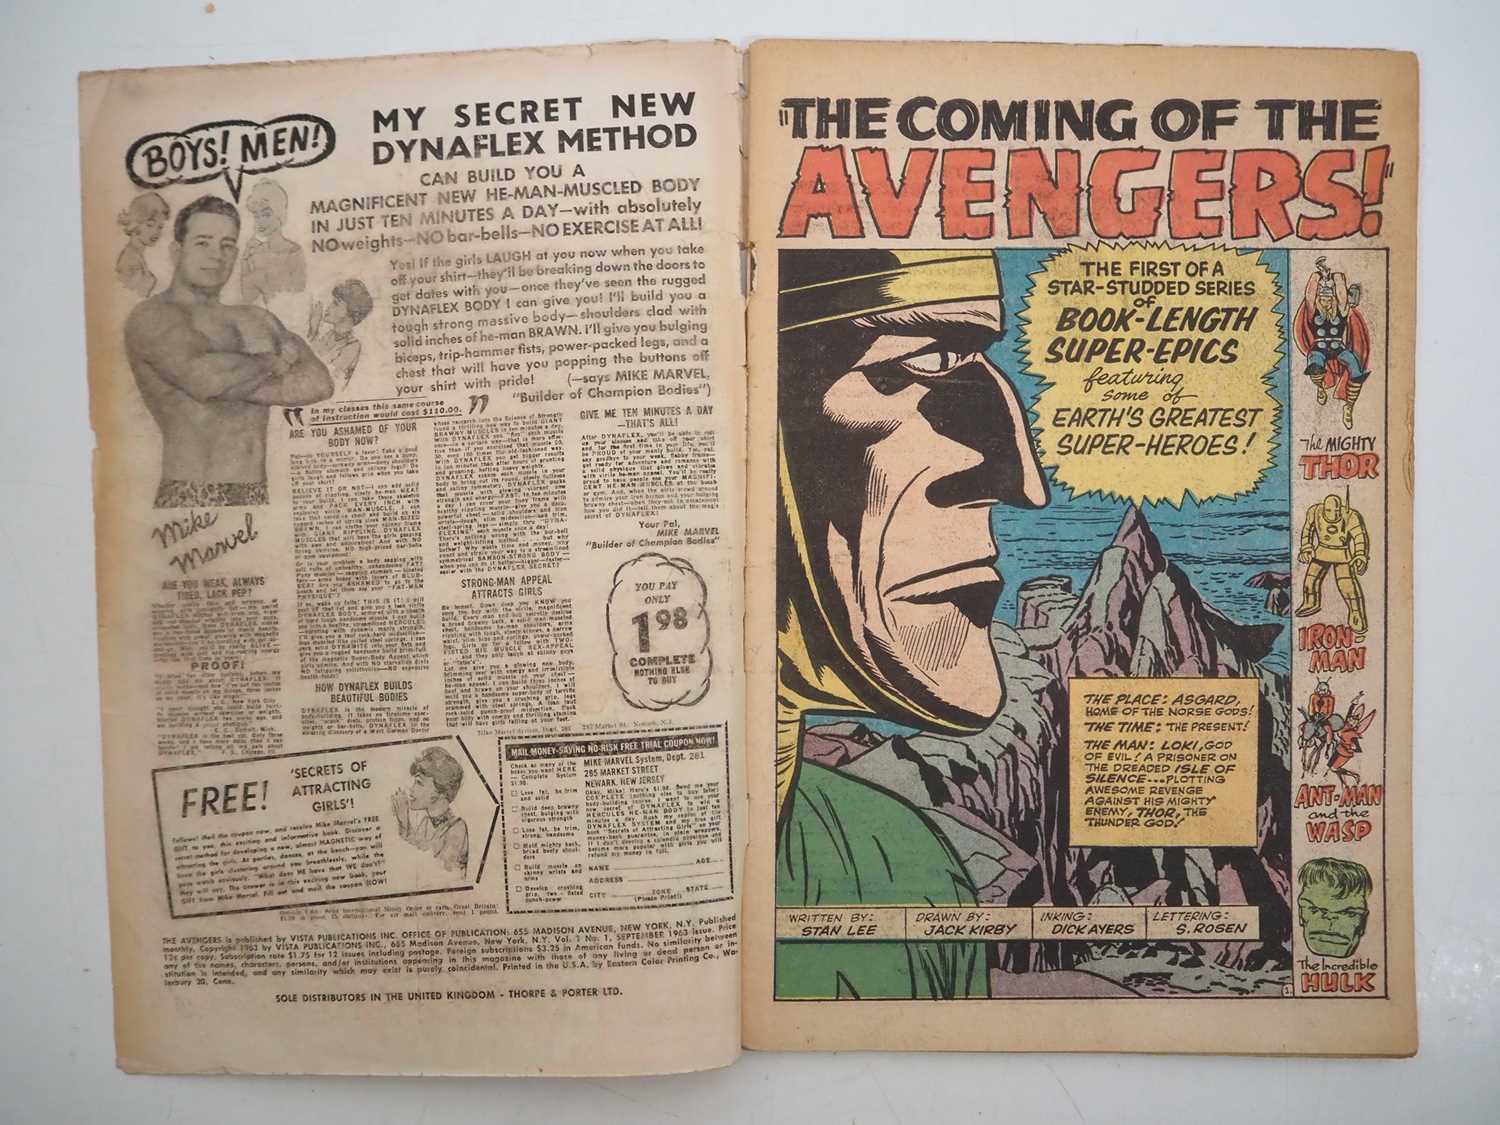 AVENGERS #1 - (1963 - MARVEL - UK Price Variant) - KEY Comic Book - First appearance of the Avengers - Image 7 of 29